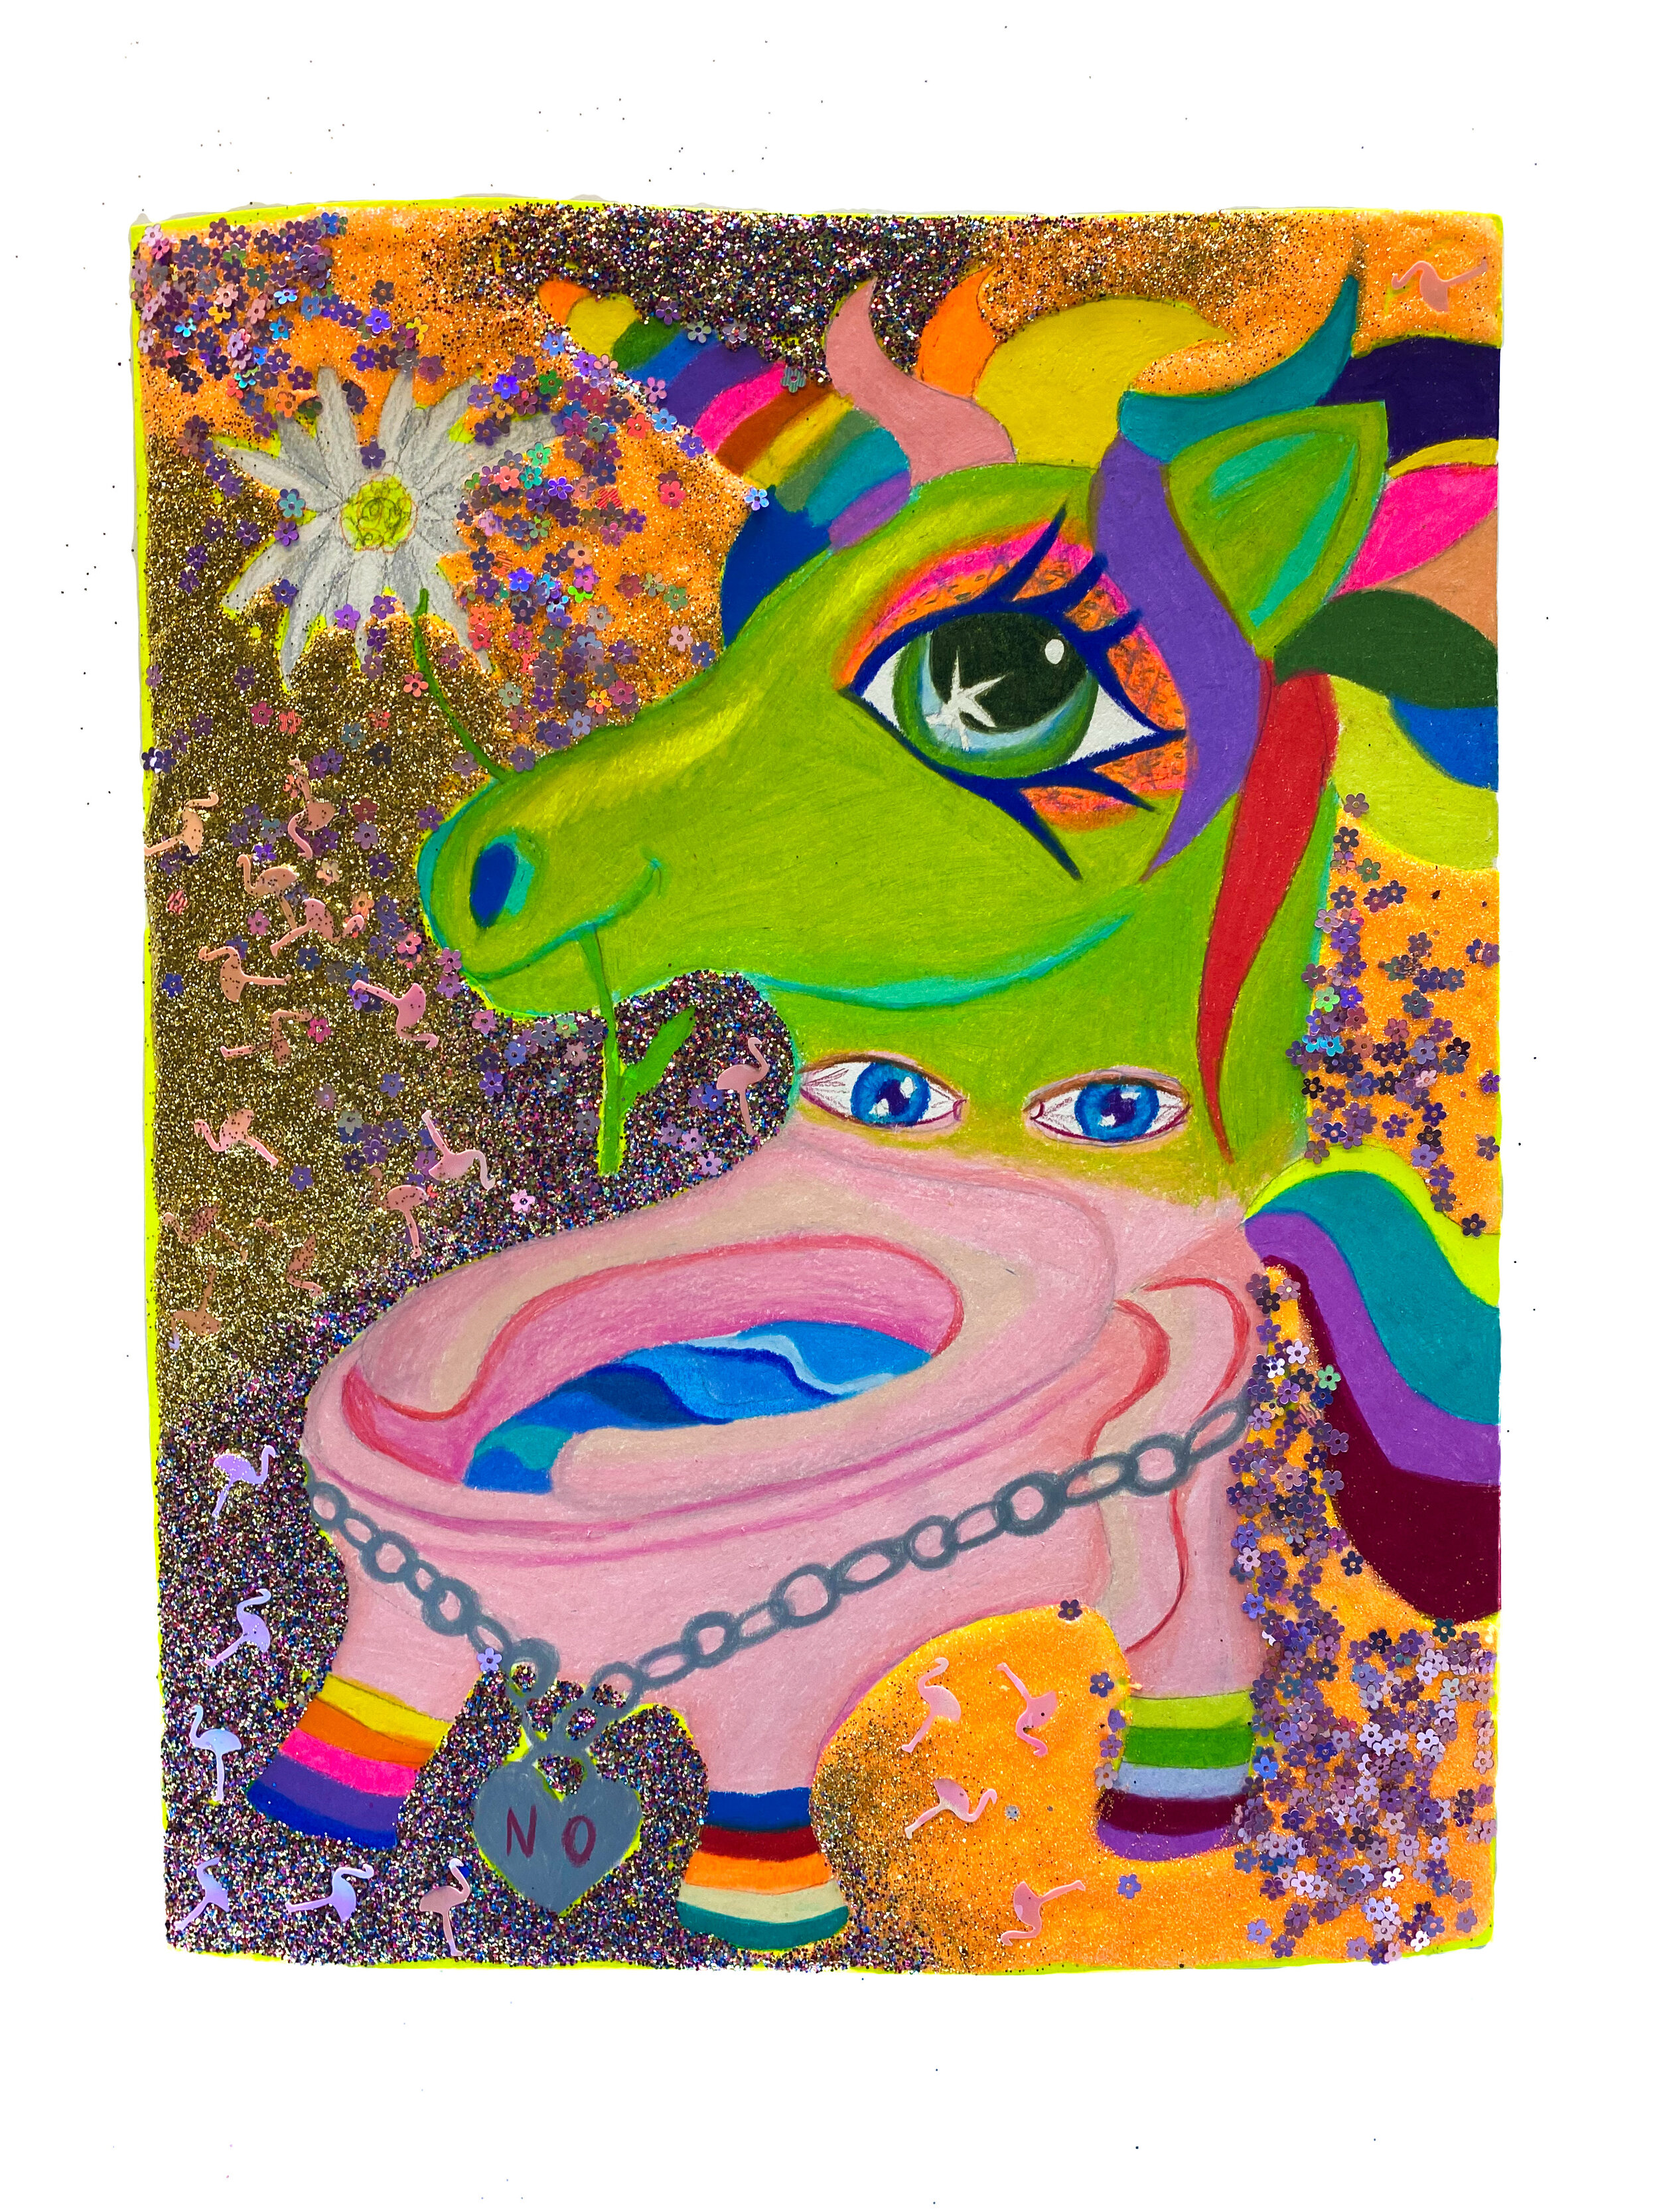   Ashamed Girls Pony Toilet , 2021  14 x 11 inches (38.1 x 27.94 cm.)  Colored pencil, acrylic paint, Elmer's glue, Modge Podge, and glitter on paper  Private collection, Birmingham, MI 